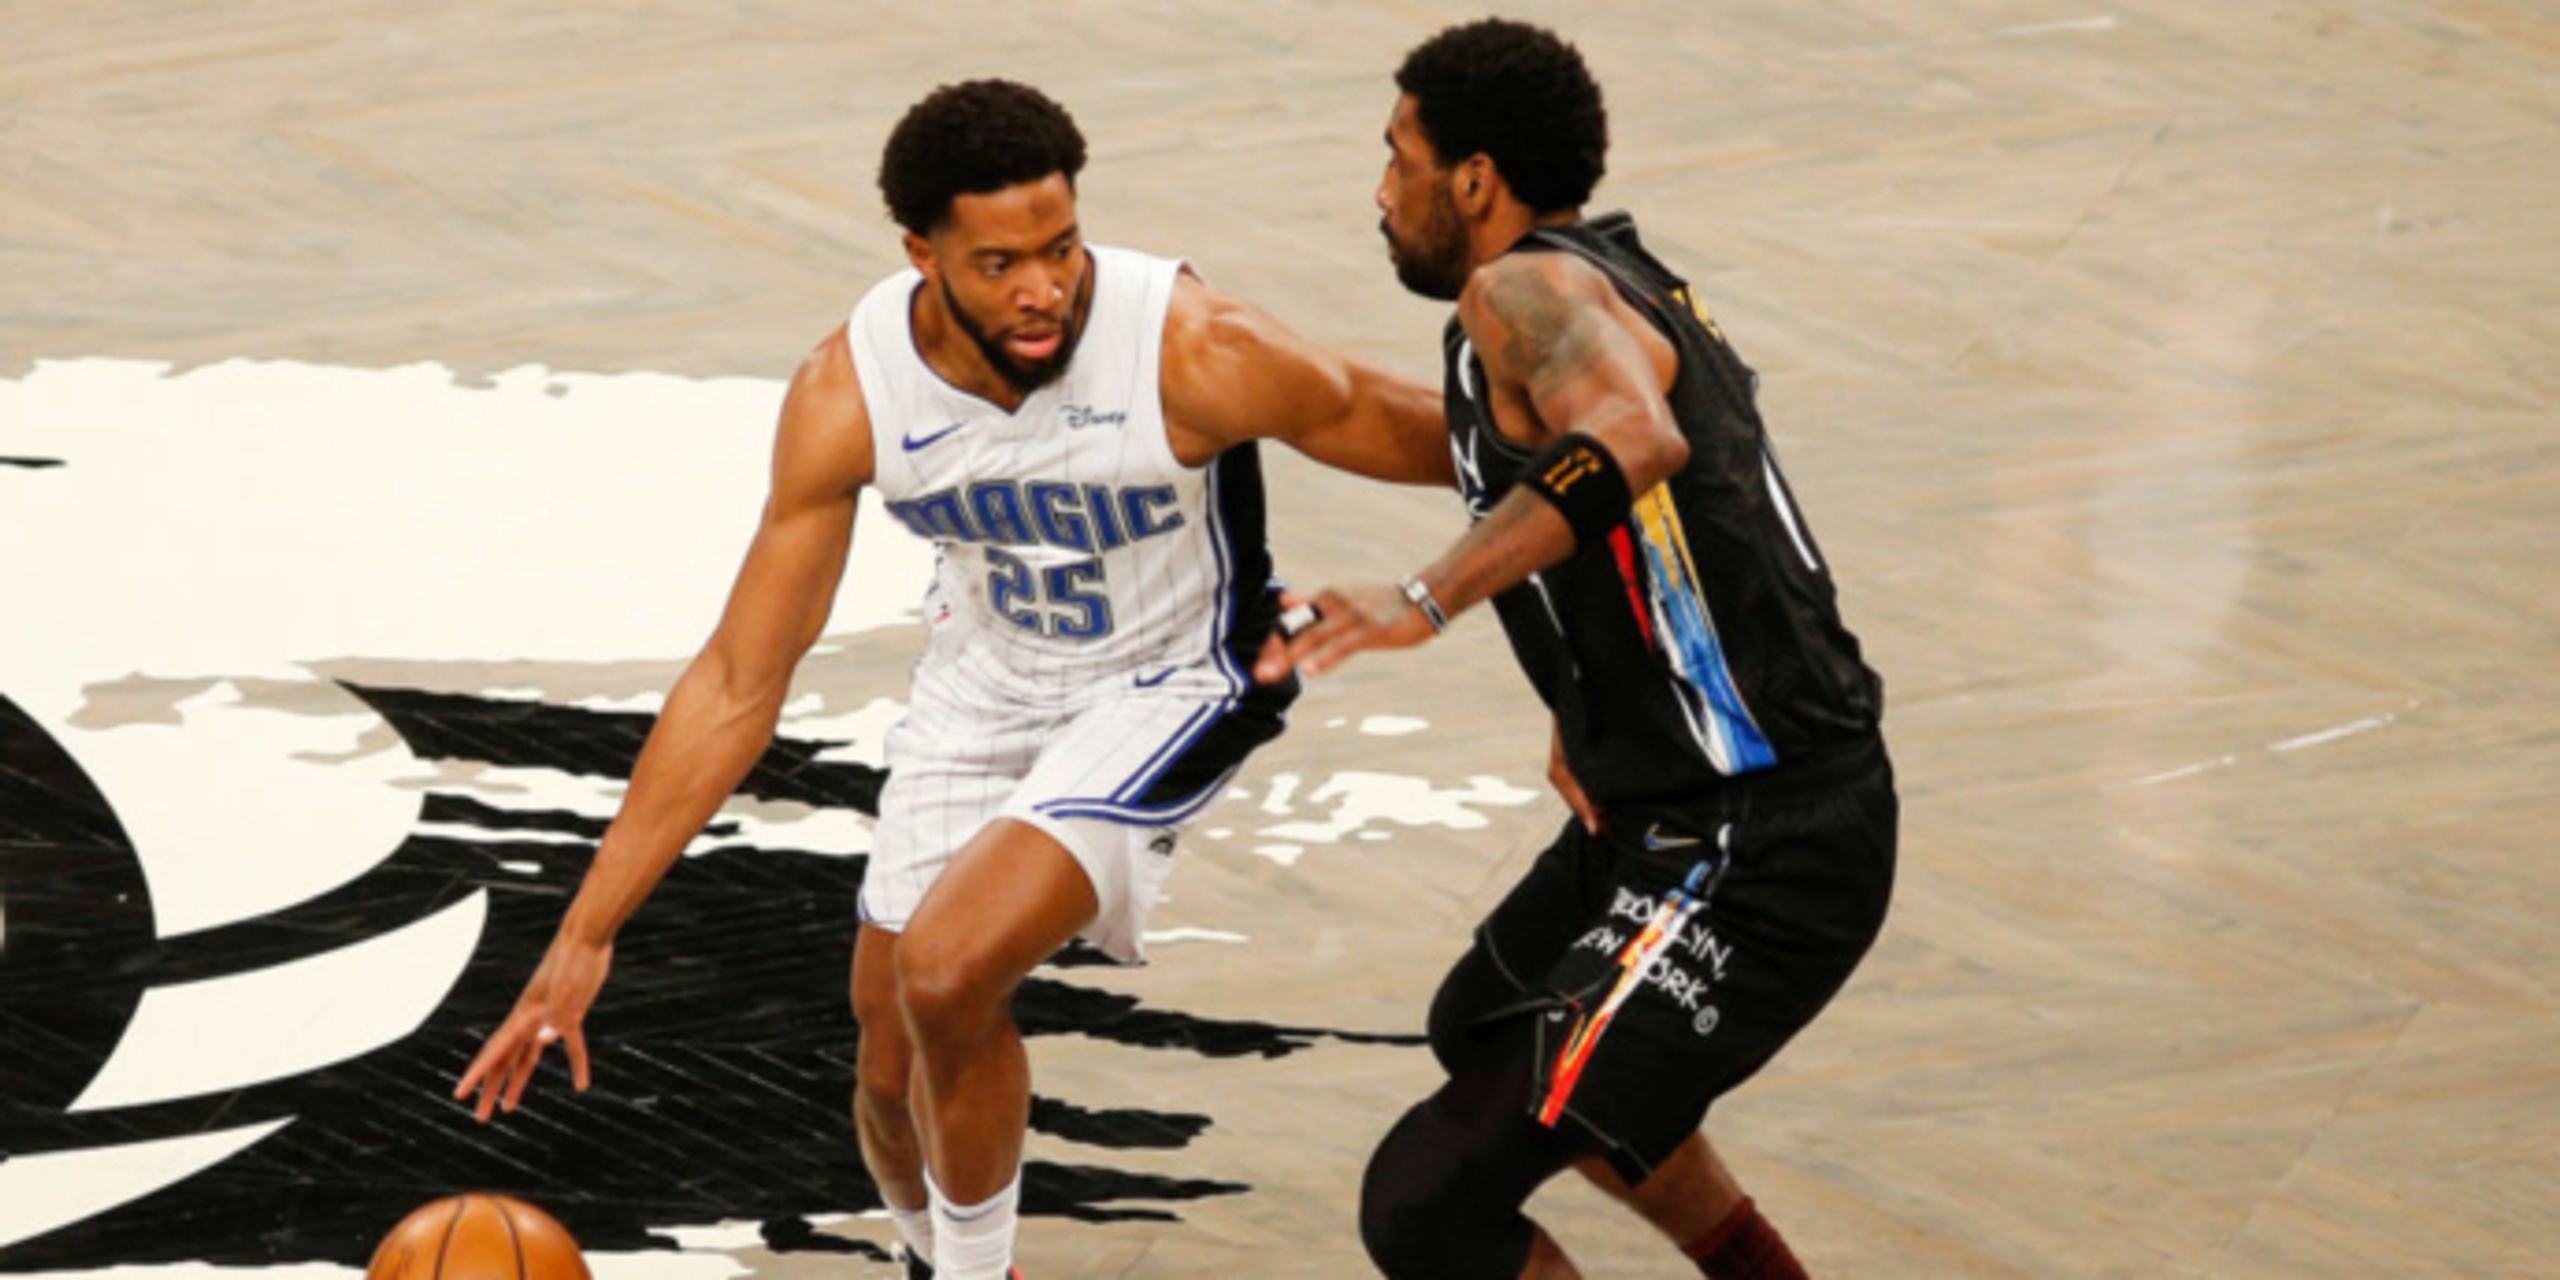 Chasson Randle's life has been '100 miles and running' since joining Magic